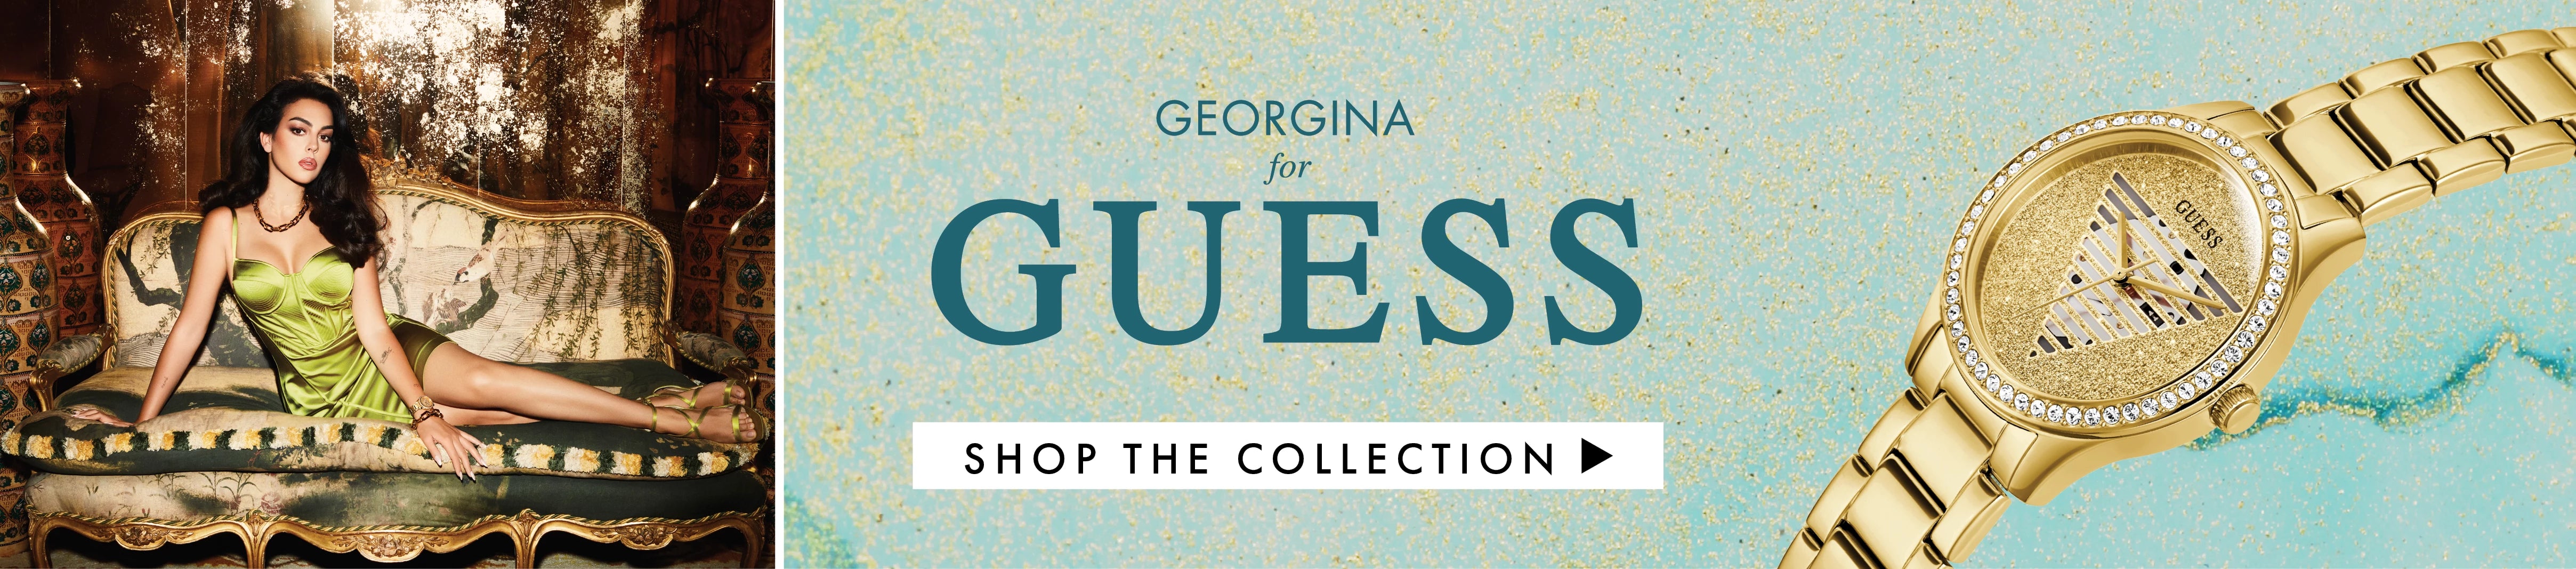 Guess Watches - Buy Online, Free Shipping | Watch Depot